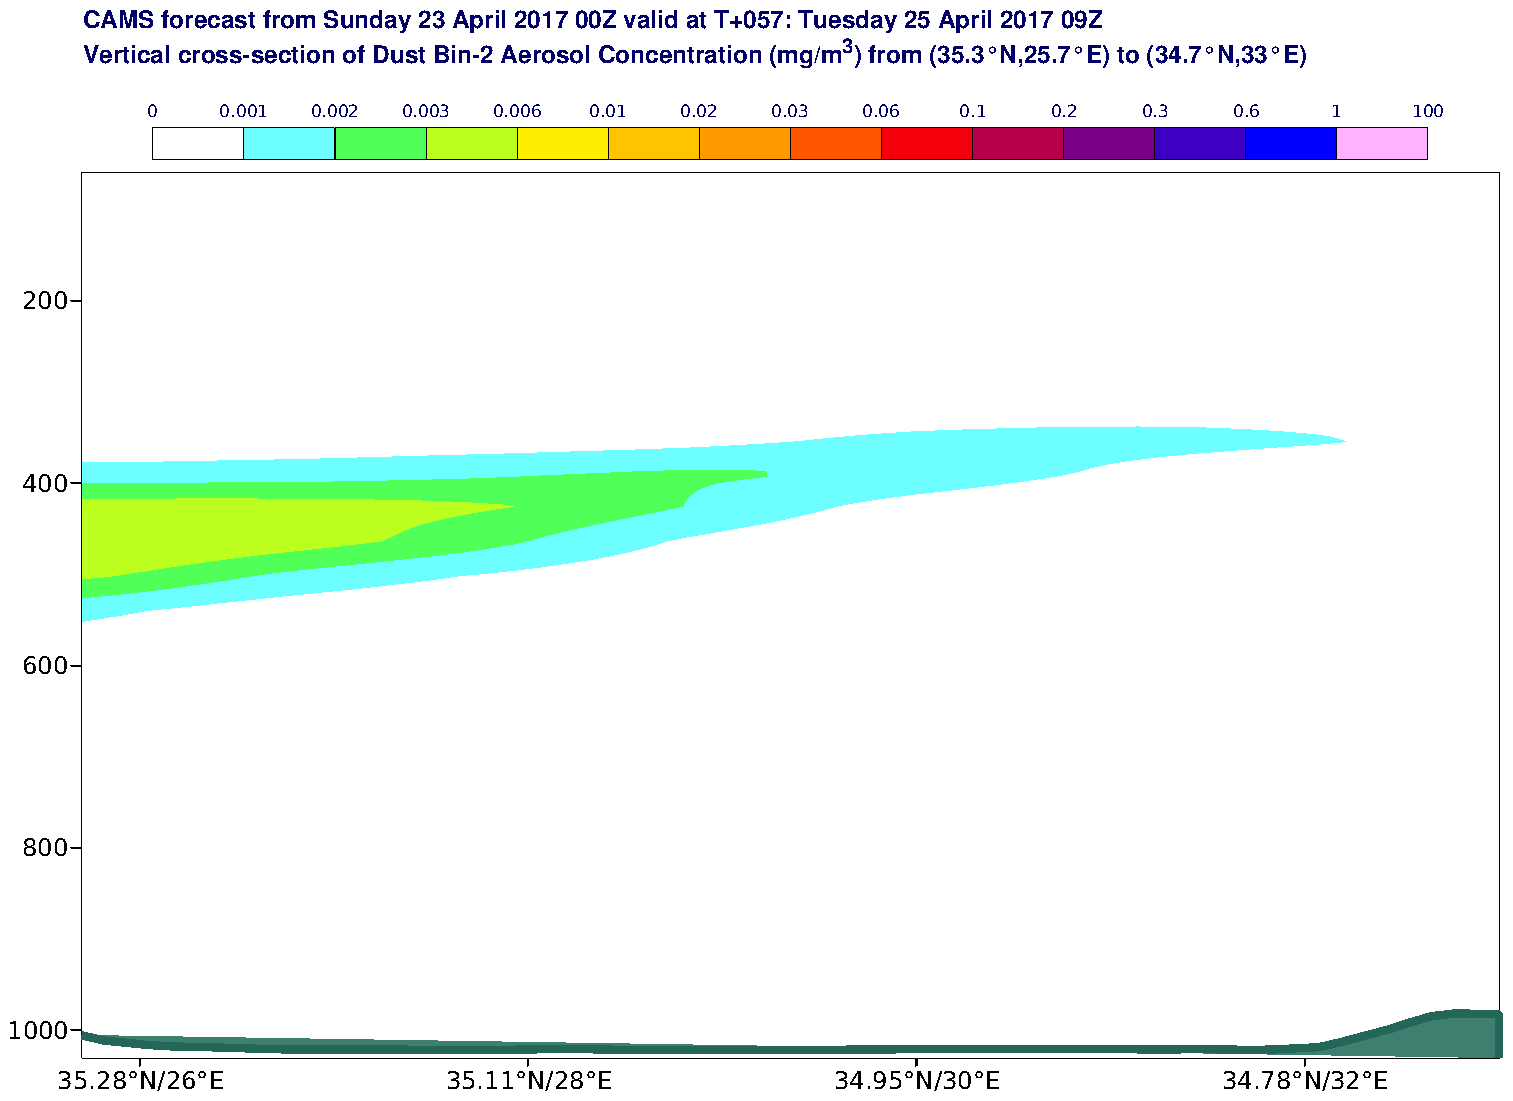 Vertical cross-section of Dust Bin-2 Aerosol Concentration (mg/m3) valid at T57 - 2017-04-25 09:00